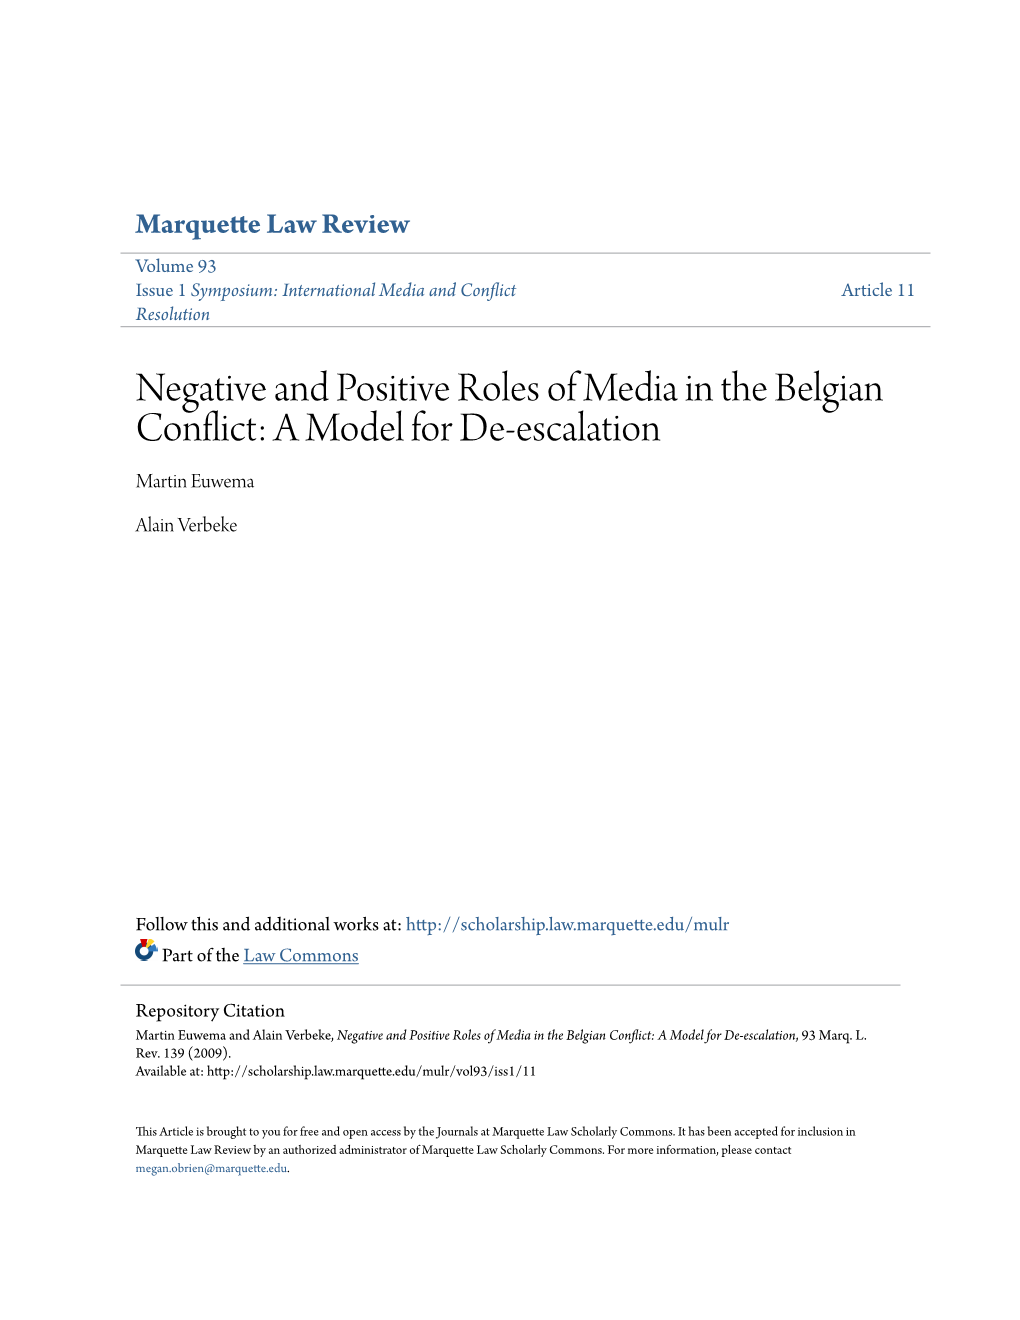 Negative and Positive Roles of Media in the Belgian Conflict: a Model for De-Escalation Martin Euwema